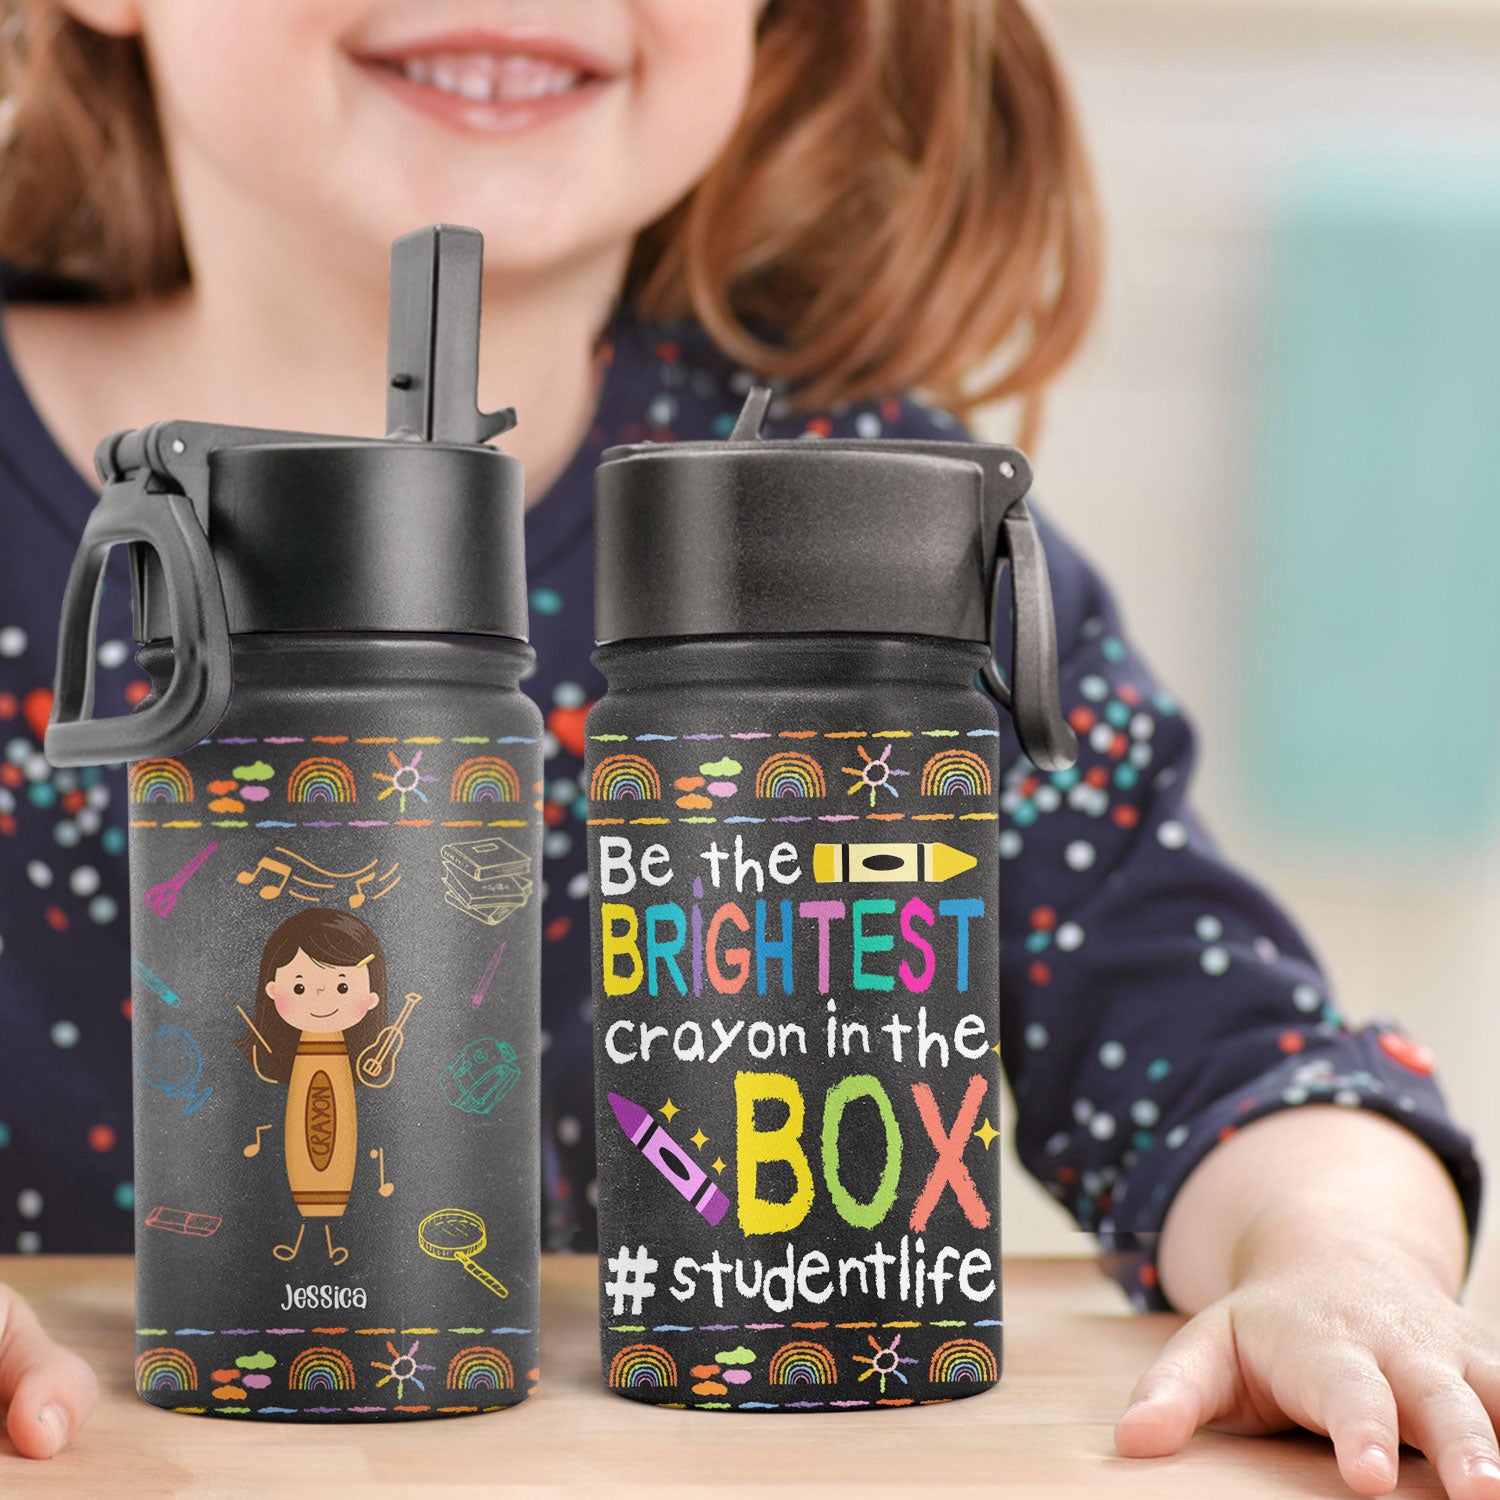 Brightest Crayon In The Box - Personalized Kids Water Bottle With Straw Lid - Back To School, Birthday Gift For Student, Kids, Schoolkids, Son, Daughter - Crayon Kid